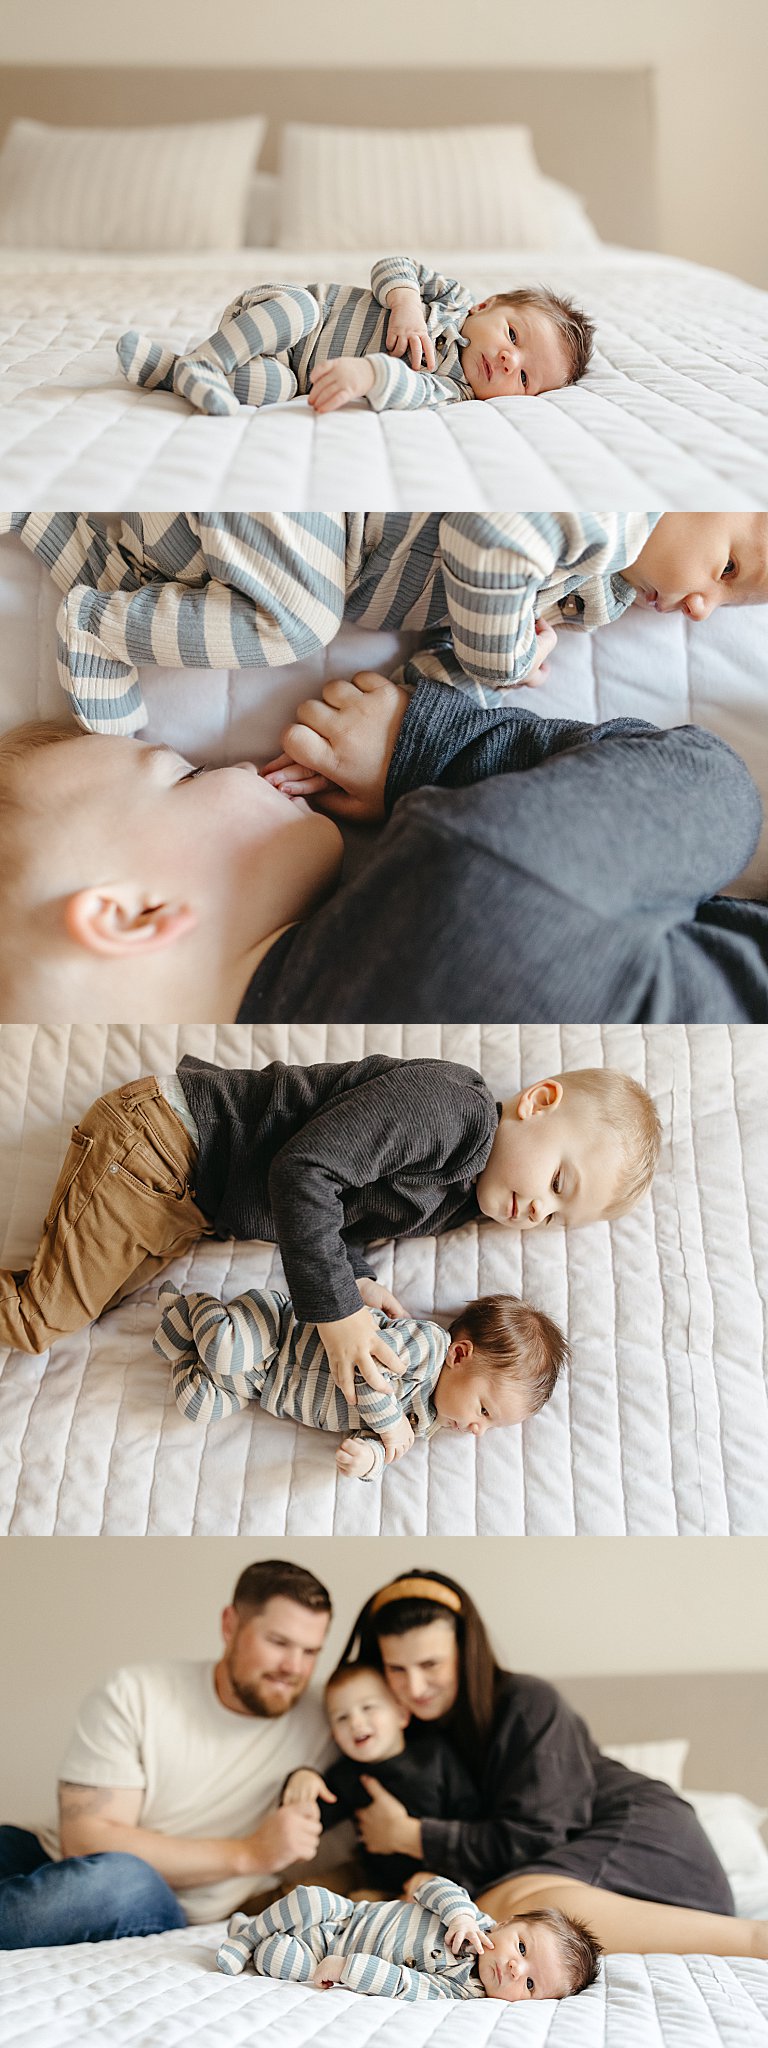 siblings snuggle together on parents' bed by Nikki Meer Photography